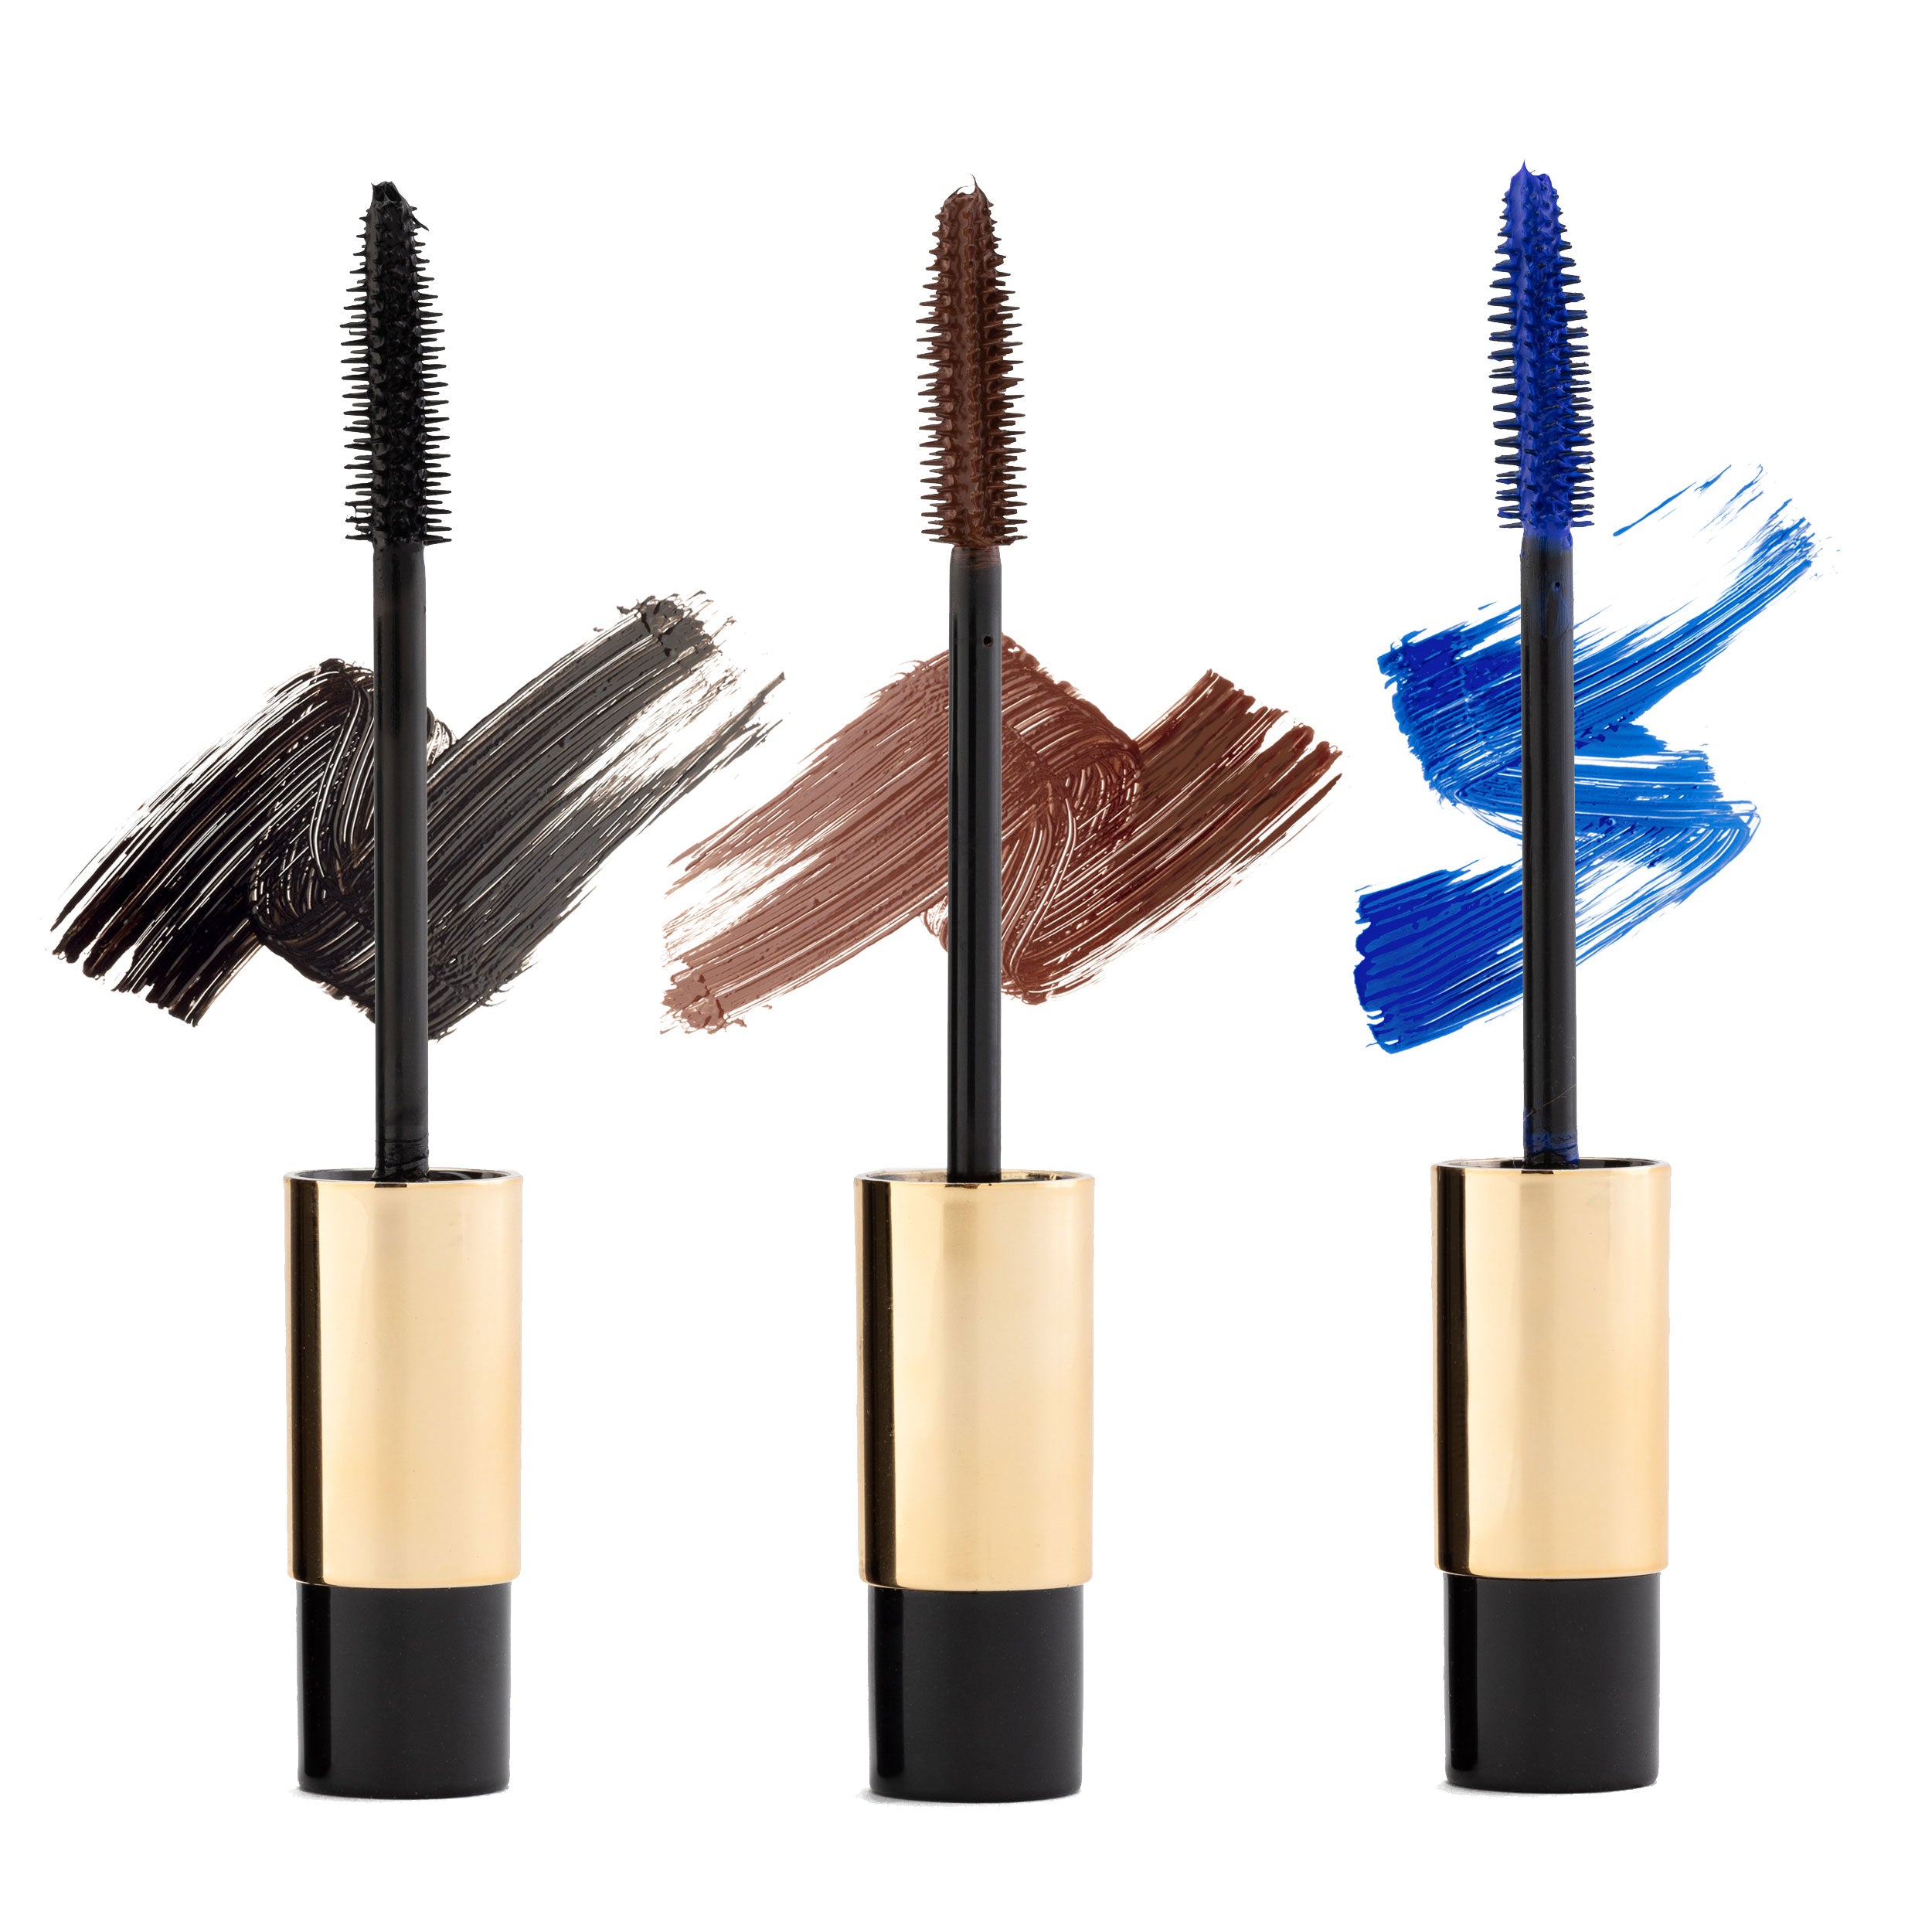 Long Lashes Mascara For Dramatic Looks – Carbon Black, Brown and Blue Mascara